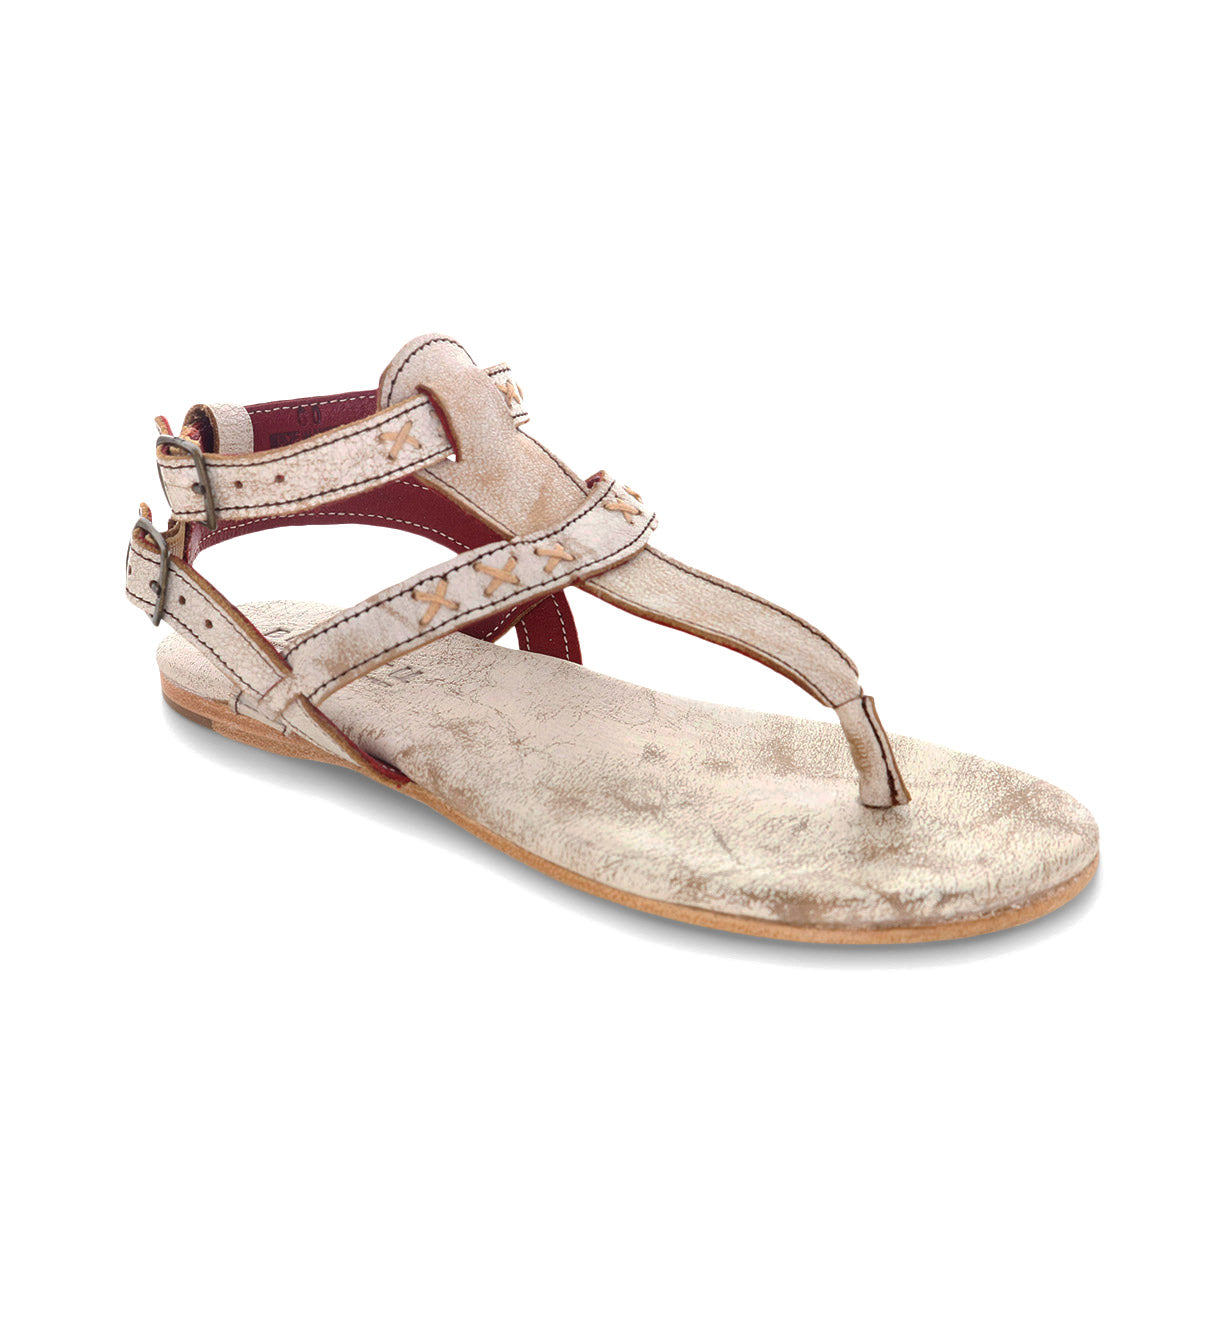 A pair of Bed Stu Moon women's sandals with studs and straps.